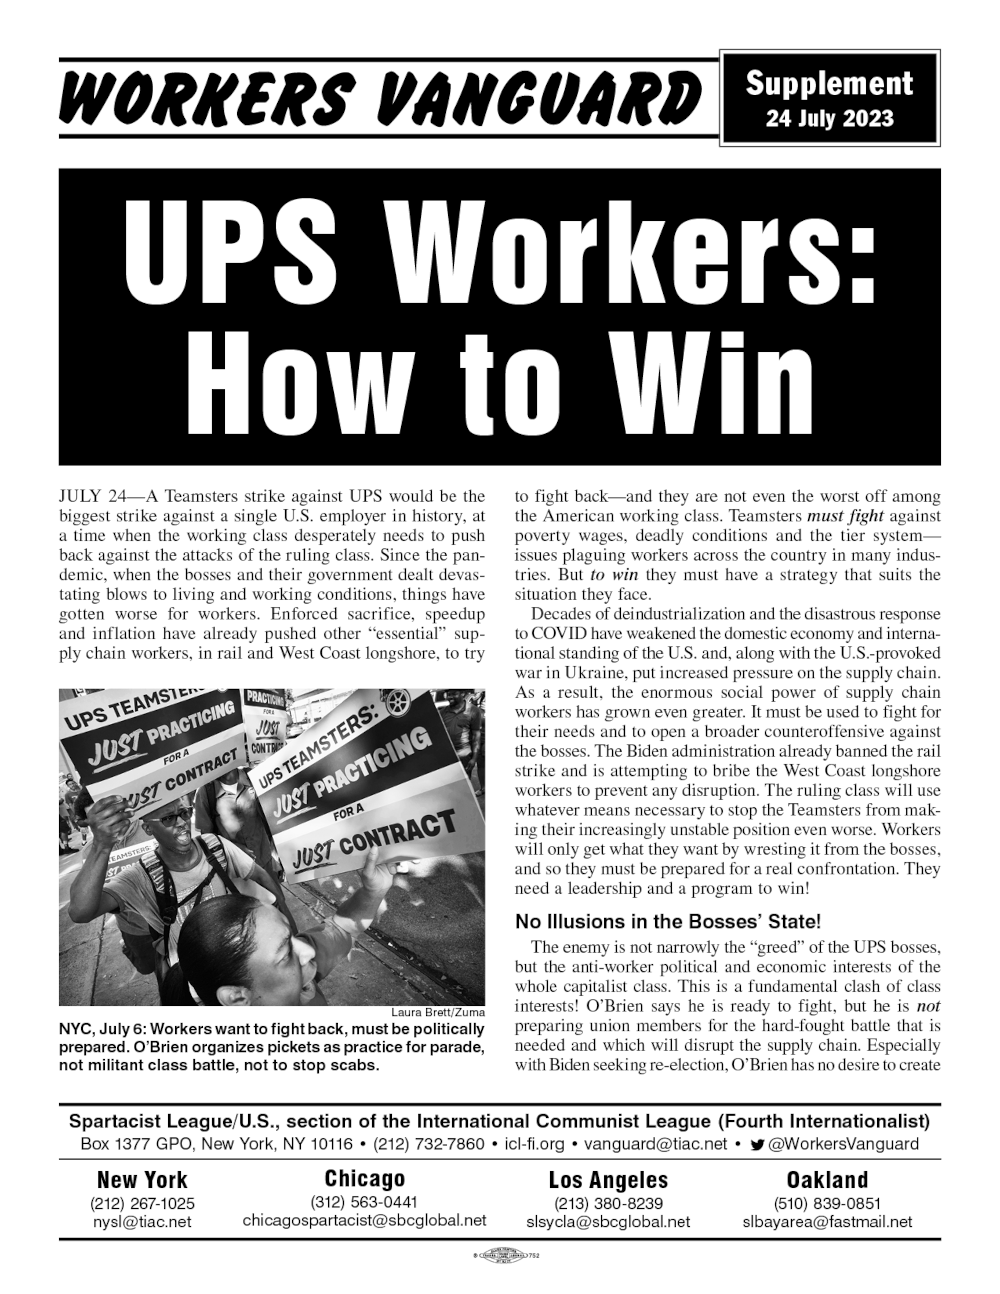 UPS Worker: How to Win  |  24 ביולי 2023